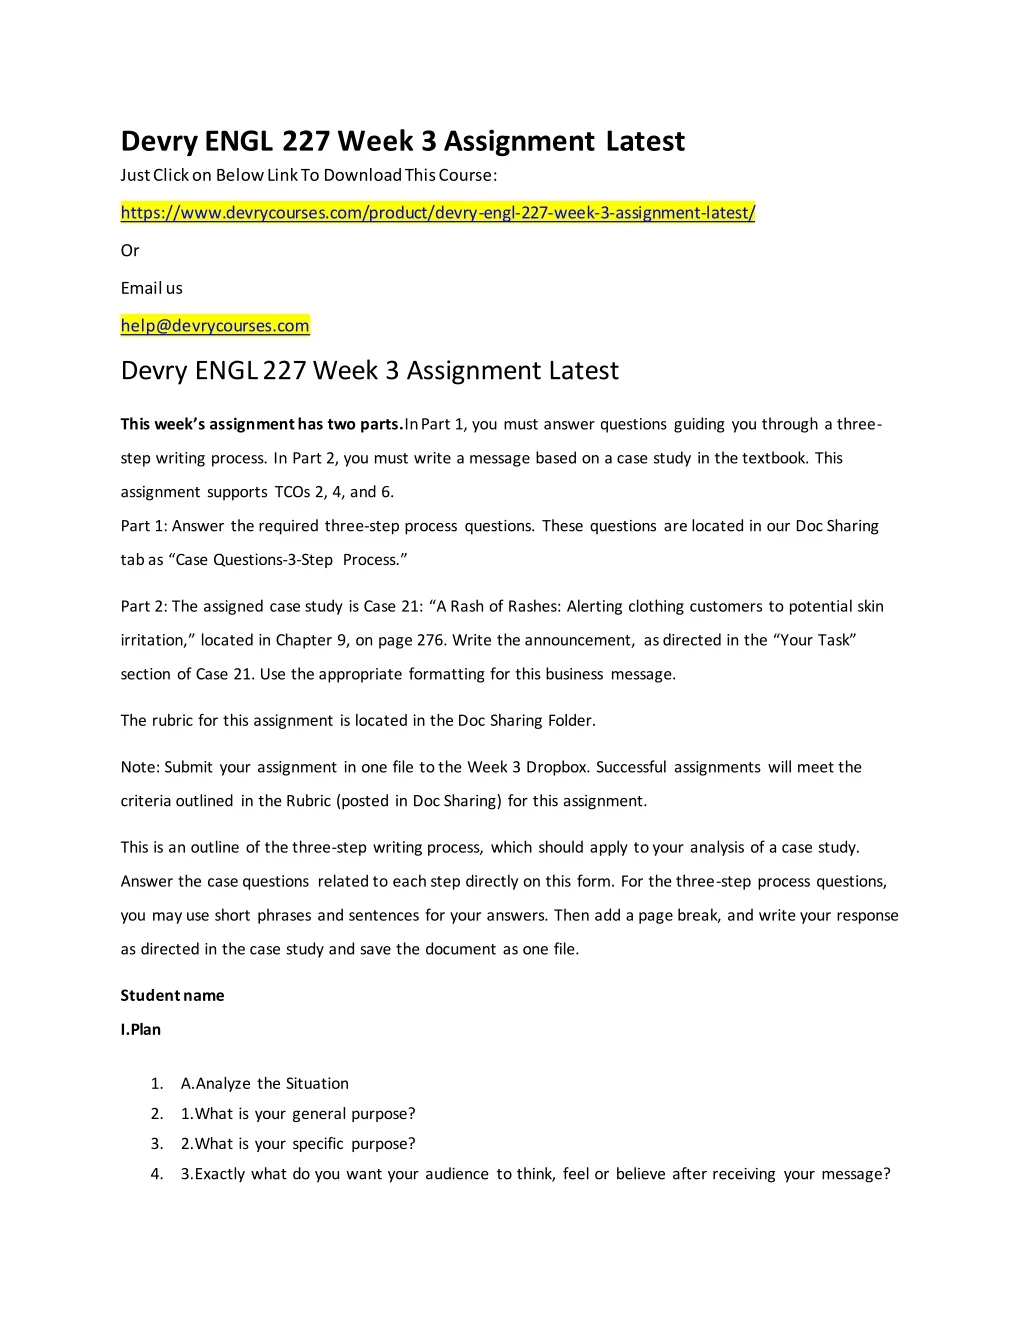 devry engl 227 week 3 assignment latest just